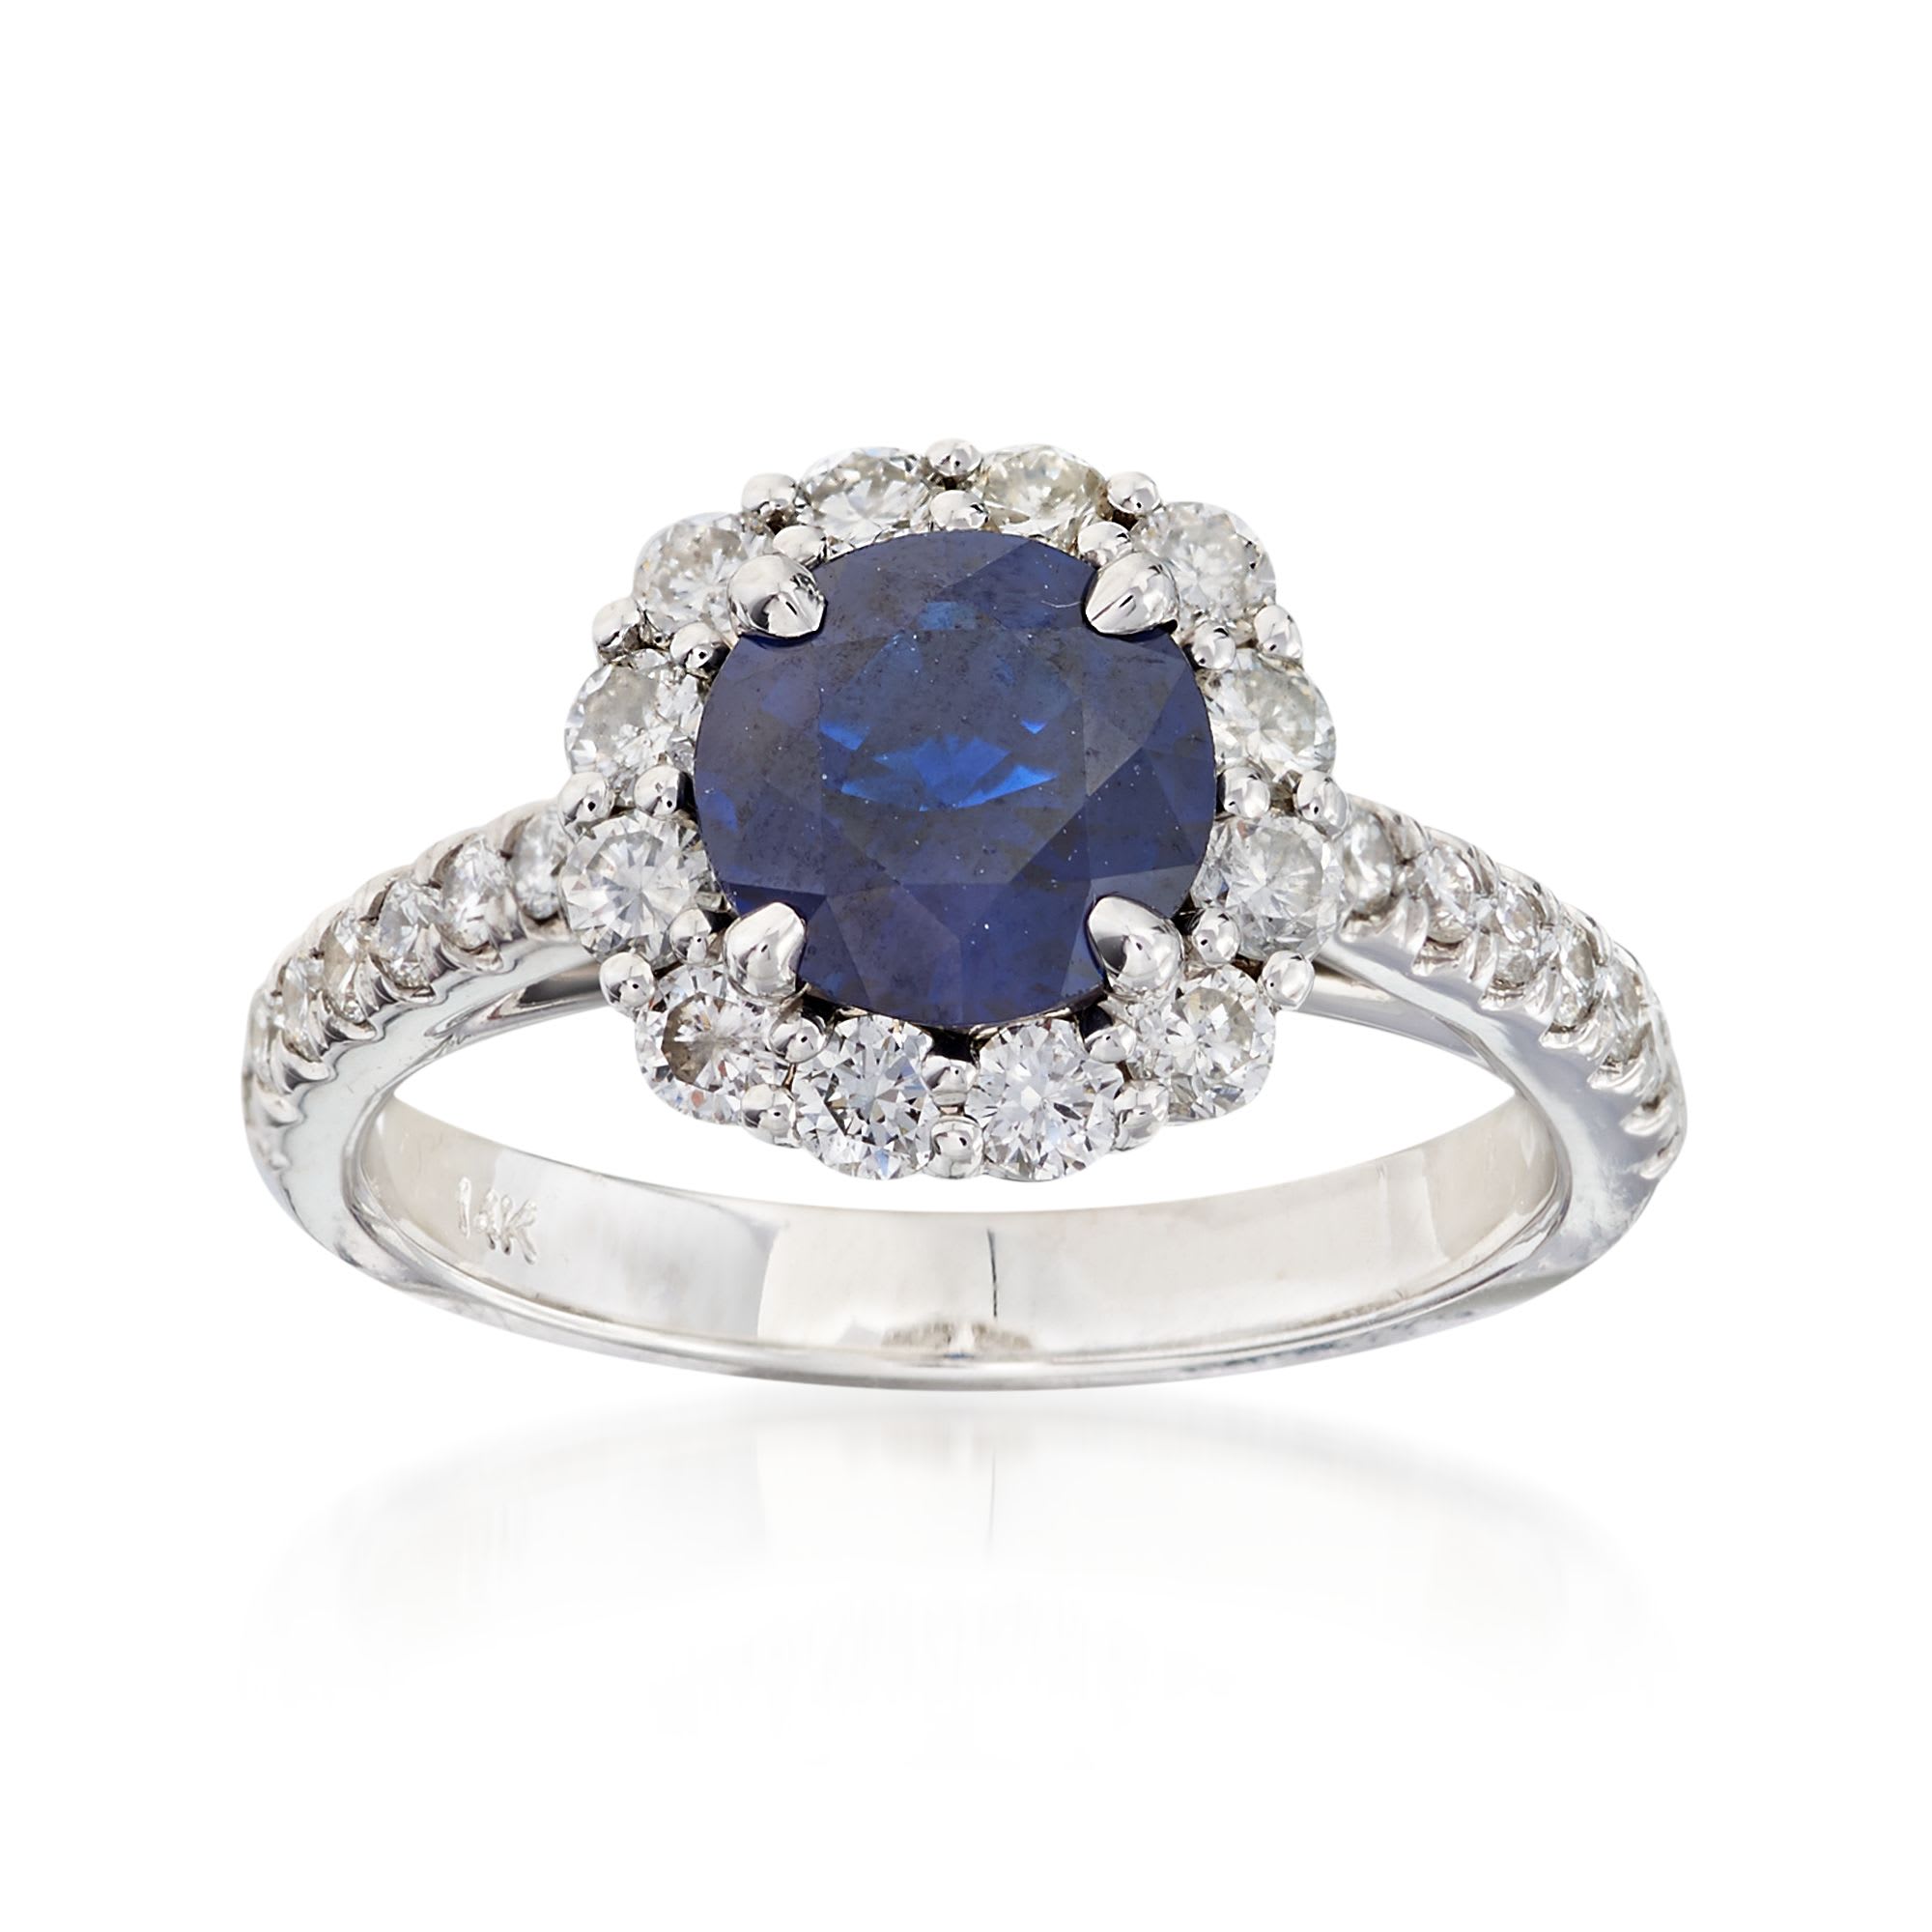 C. 2000 Vintage 1.50 Carat Sapphire and 1.00 ct. t.w. Diamond Ring in ...